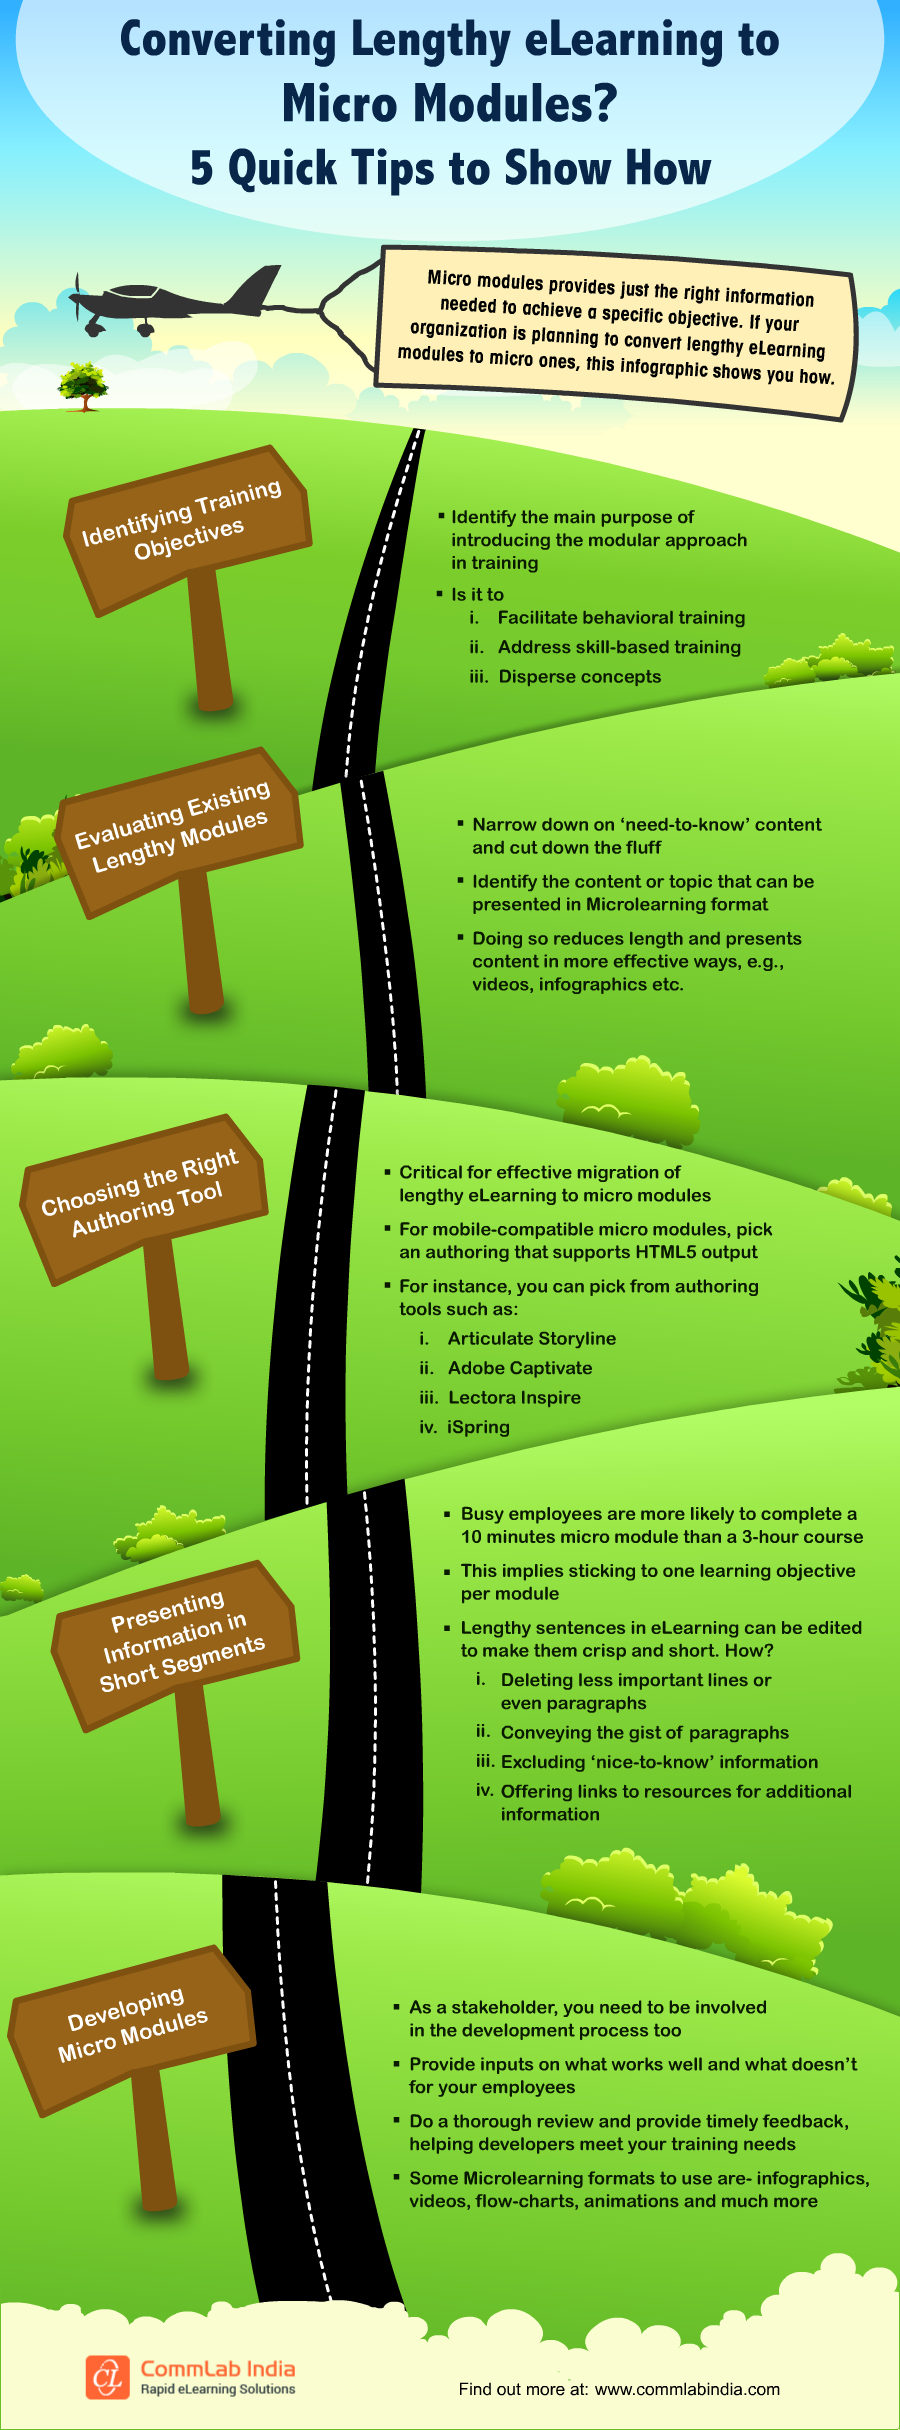 Converting Lengthy eLearning to Micro Modules? 5 Quick Tips to Show How [Infographic]